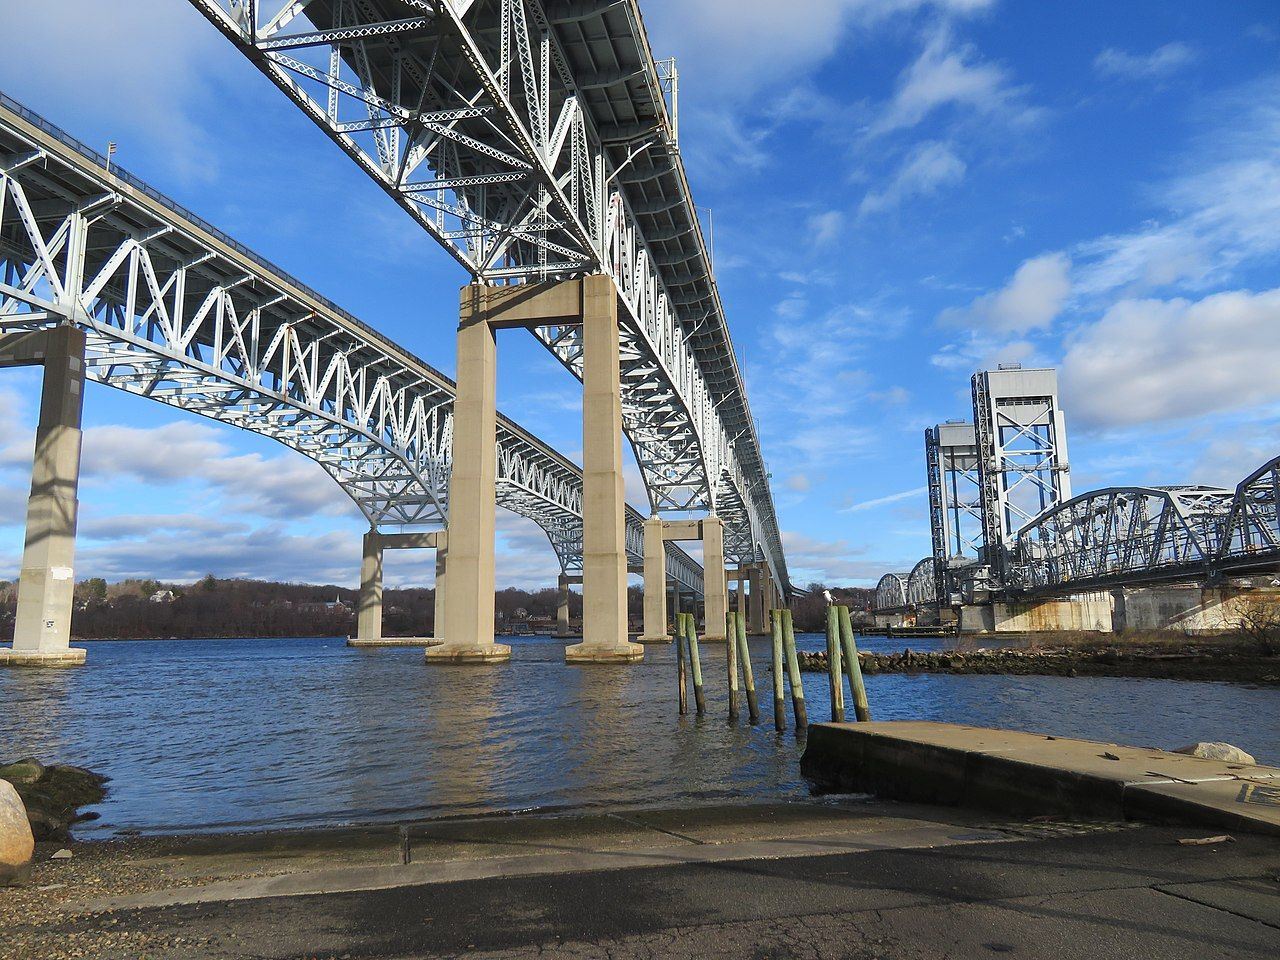 View from below of a twin silver bridges stretching across water.